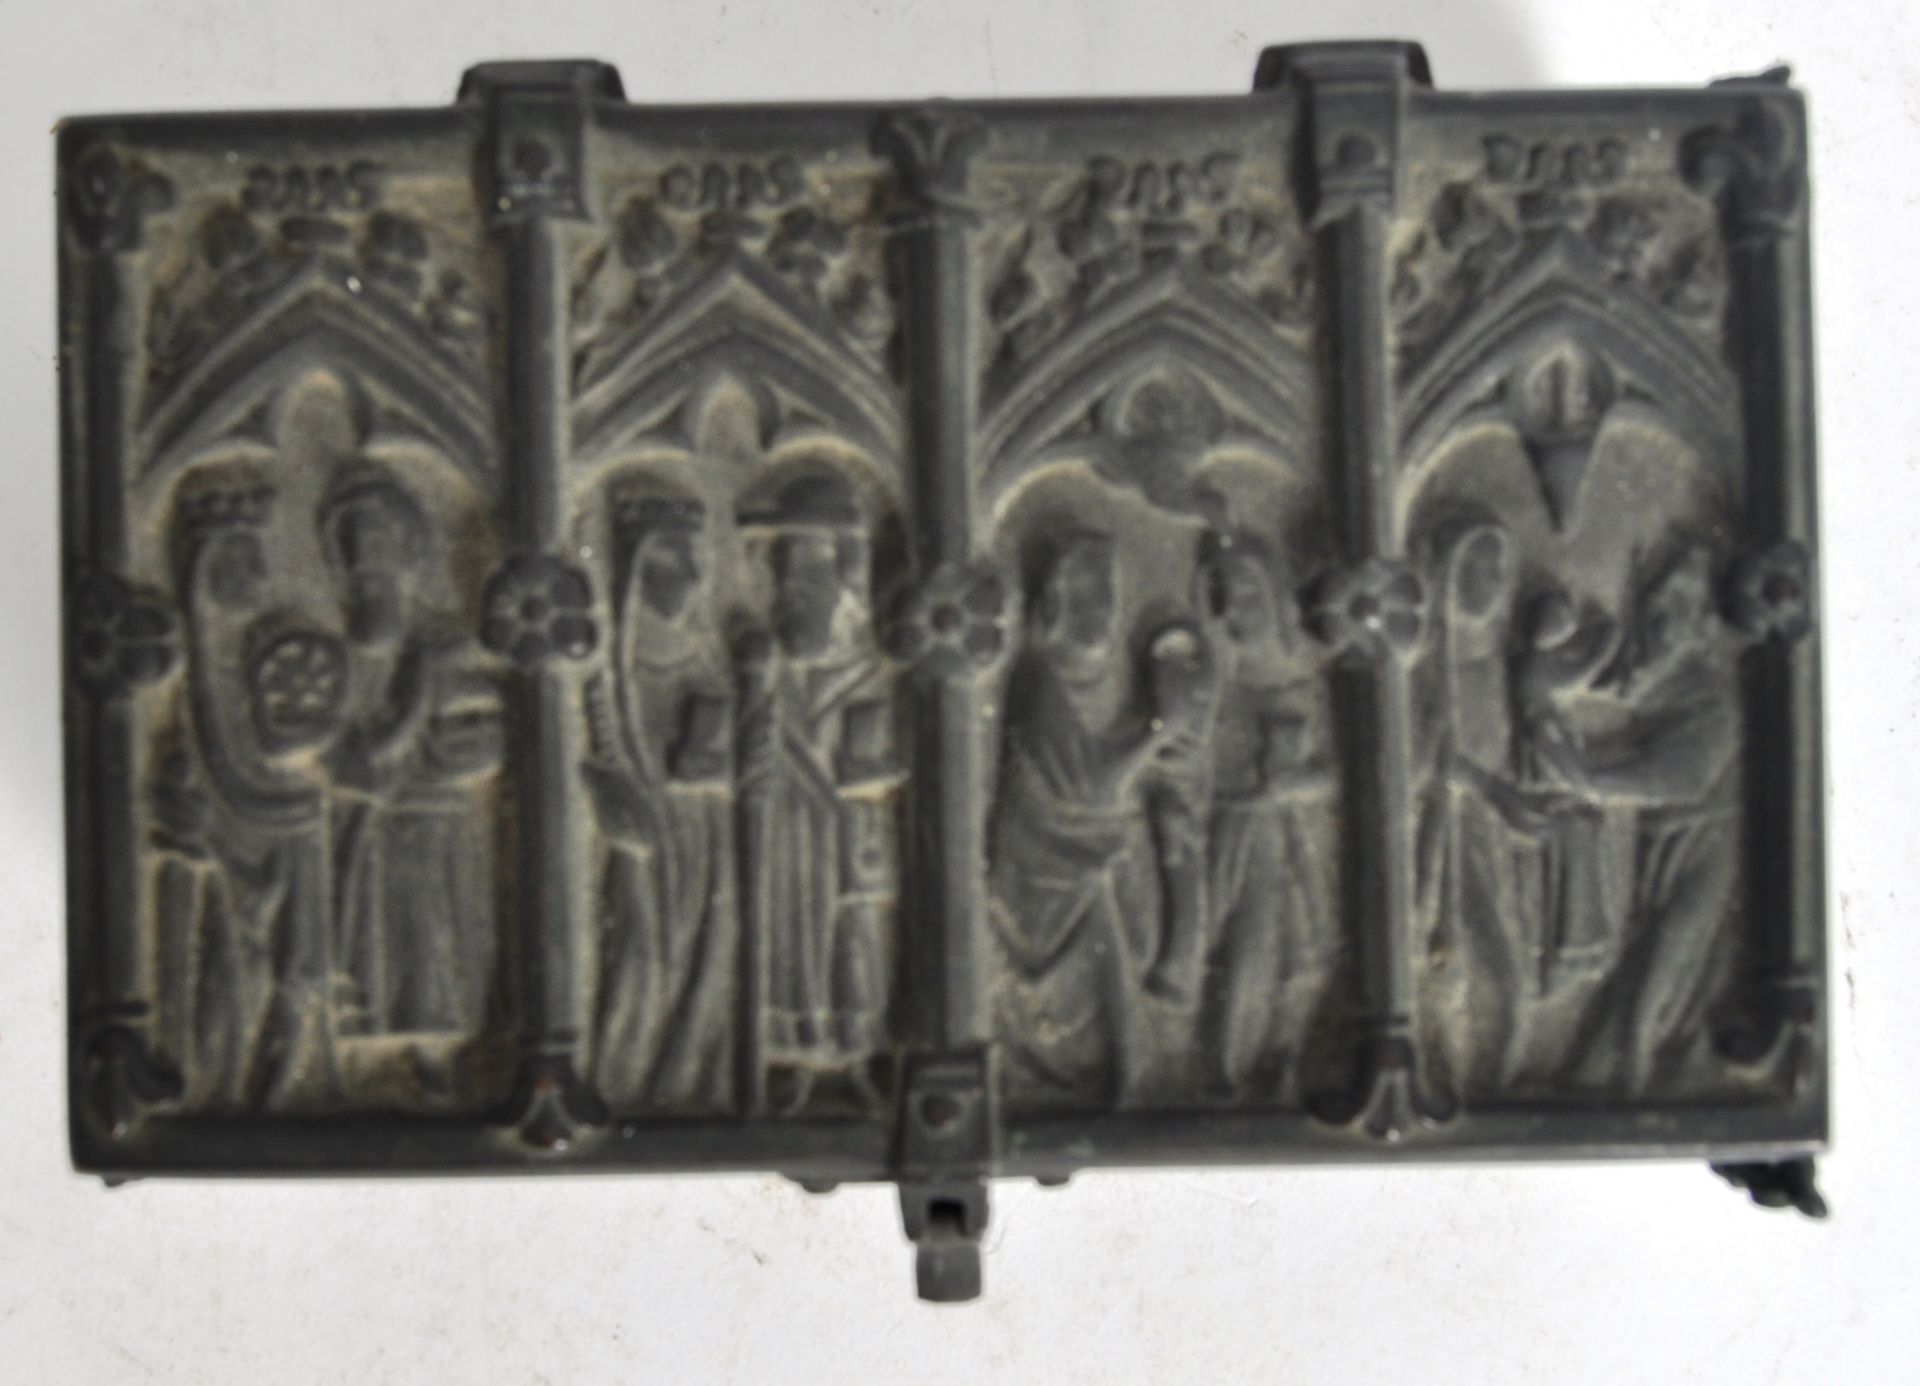 SMALL NINETEENTH CENTURY BRONZE CASKET WITH GOTHIC INLAY - Image 6 of 7